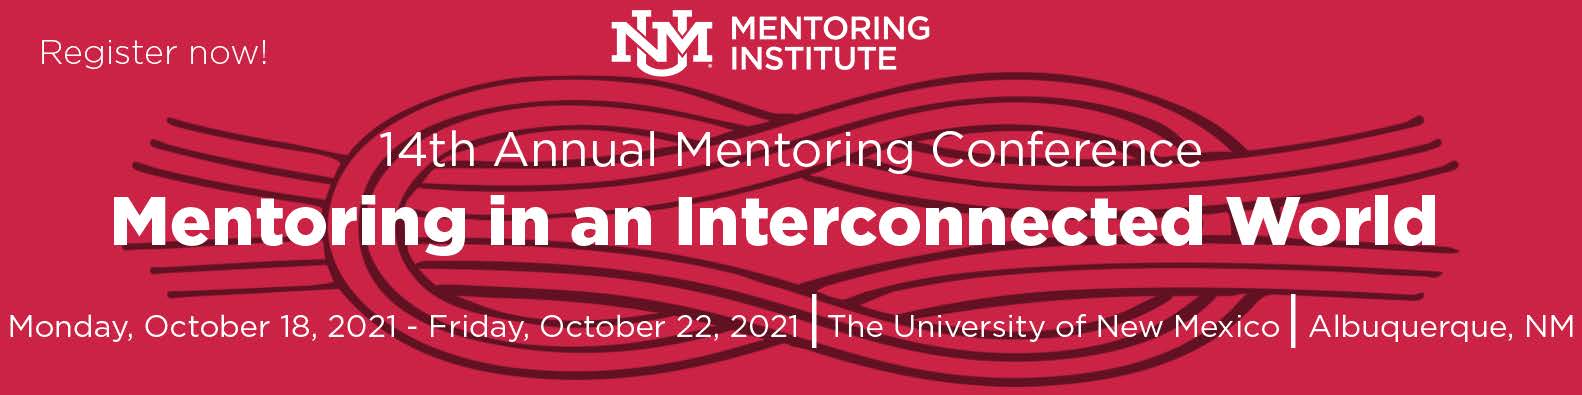 2021 Mentoring Conference